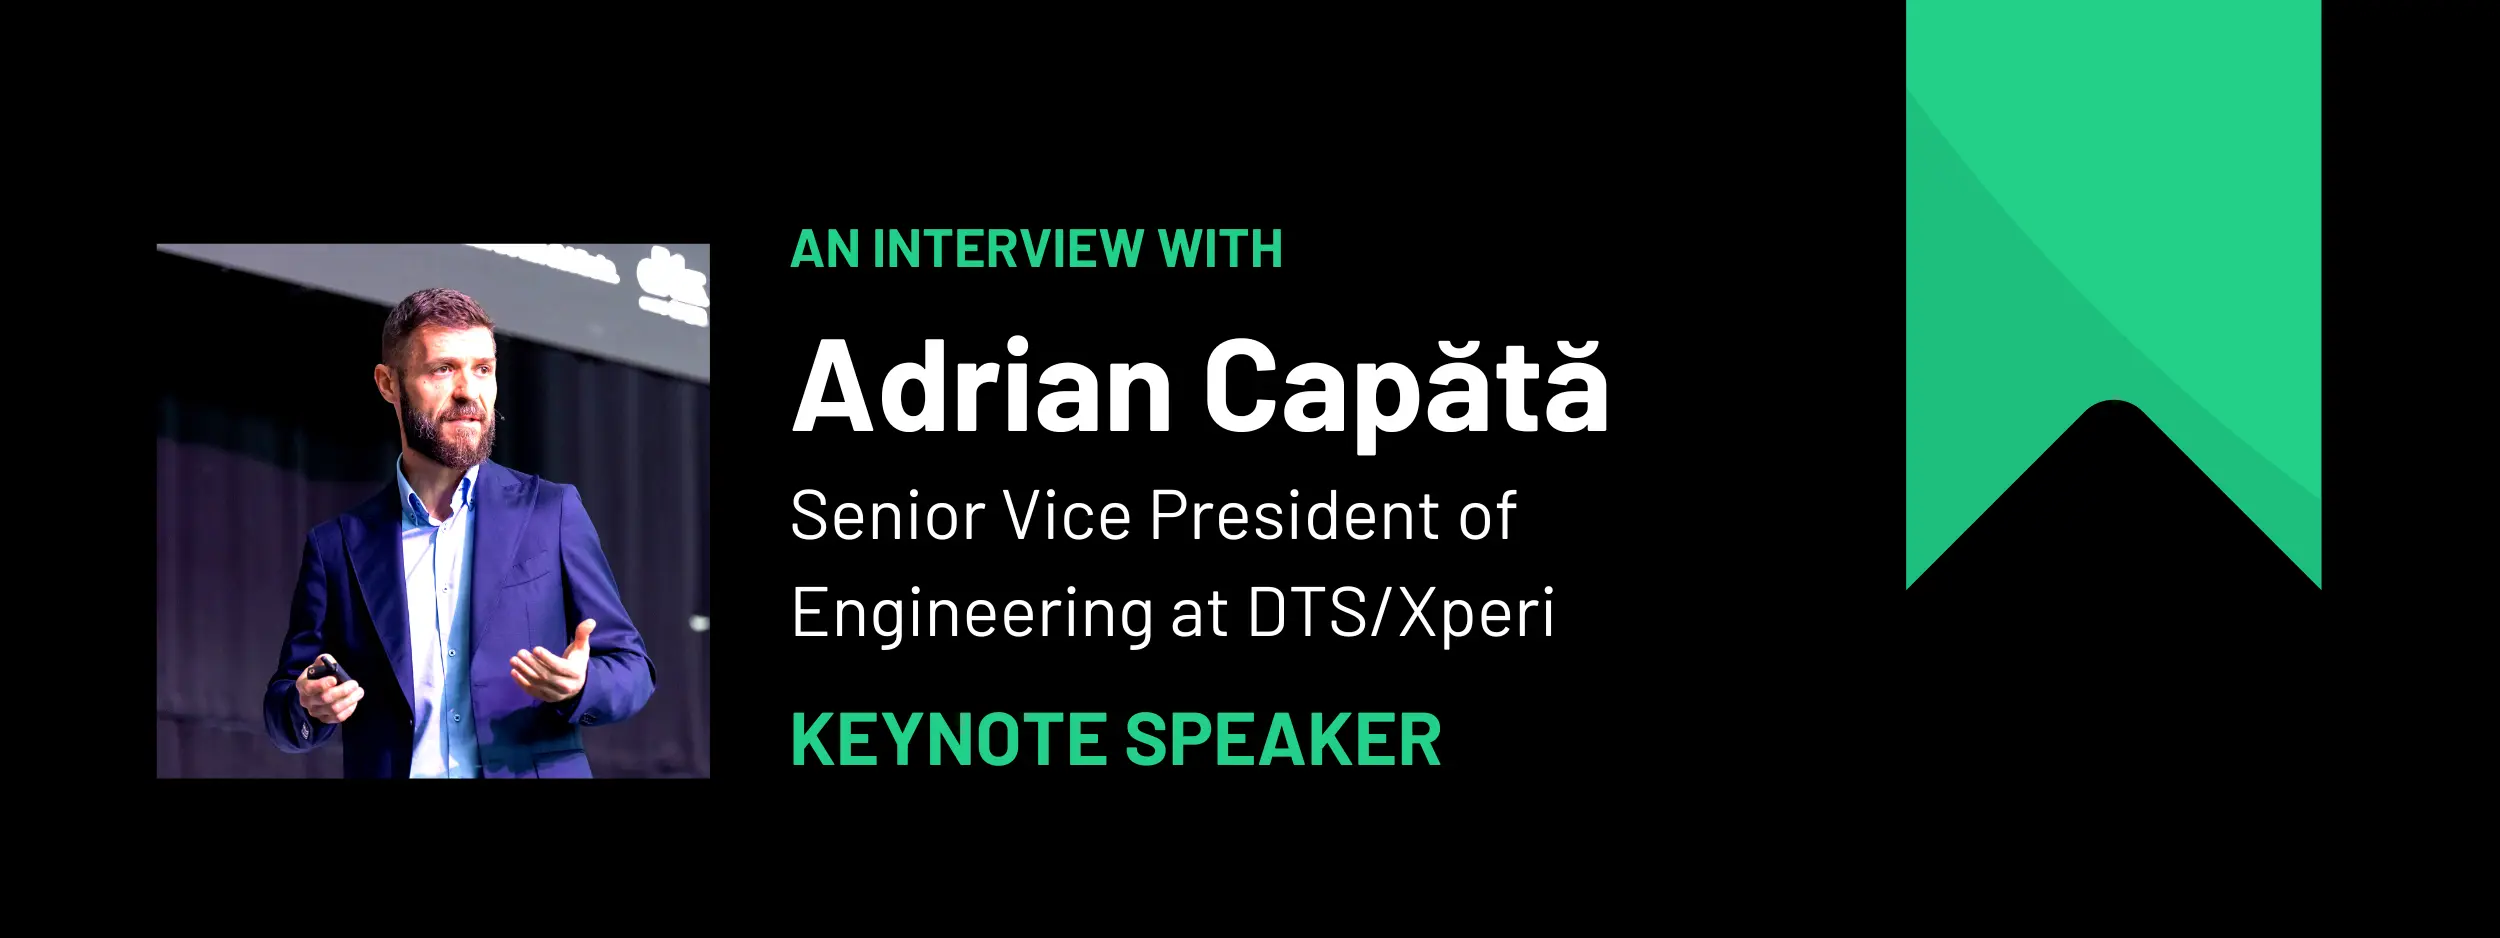 INTERVIEW WITH ADRIAN CAPĂTĂ, SVP ENGINEERING AT DTS/XPERI